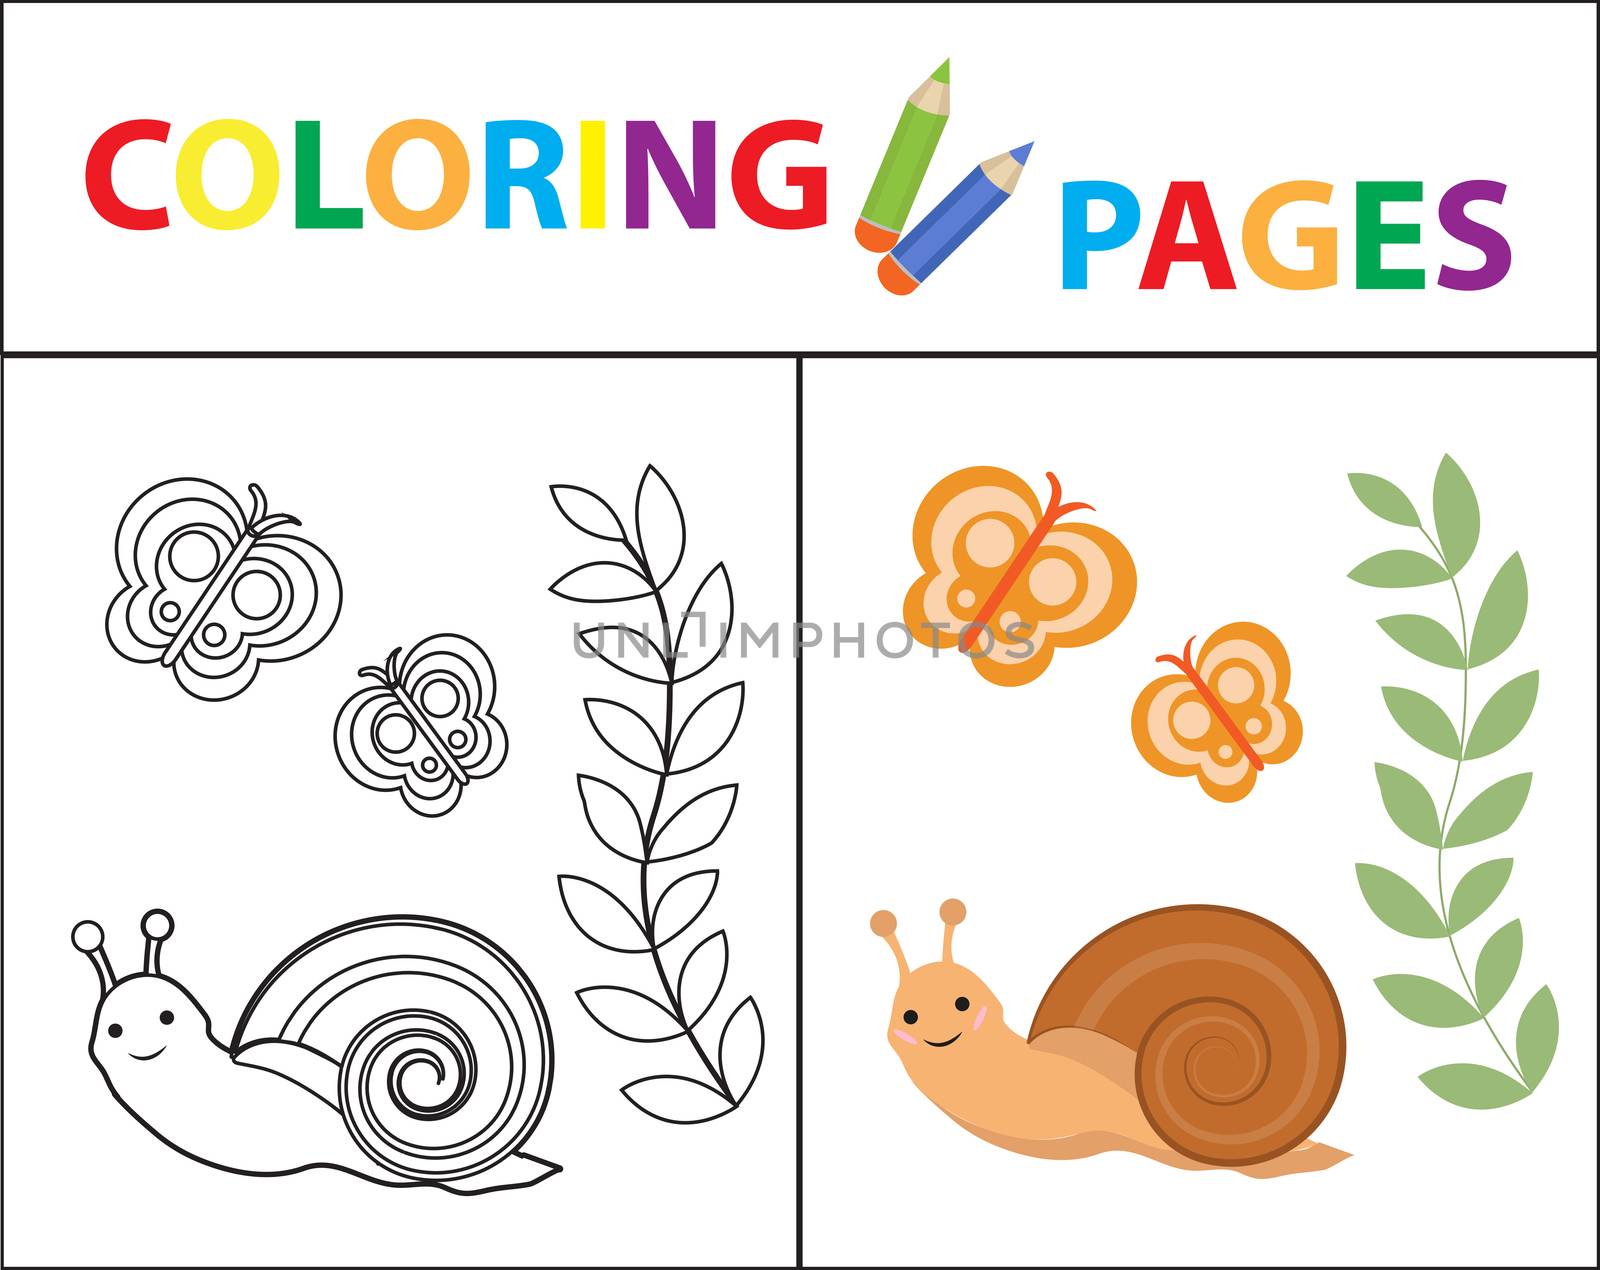 Coloring book page for kids. Snail plant and butterfly. Sketch outline and color version. Childrens education. illustration. by lucia_fox